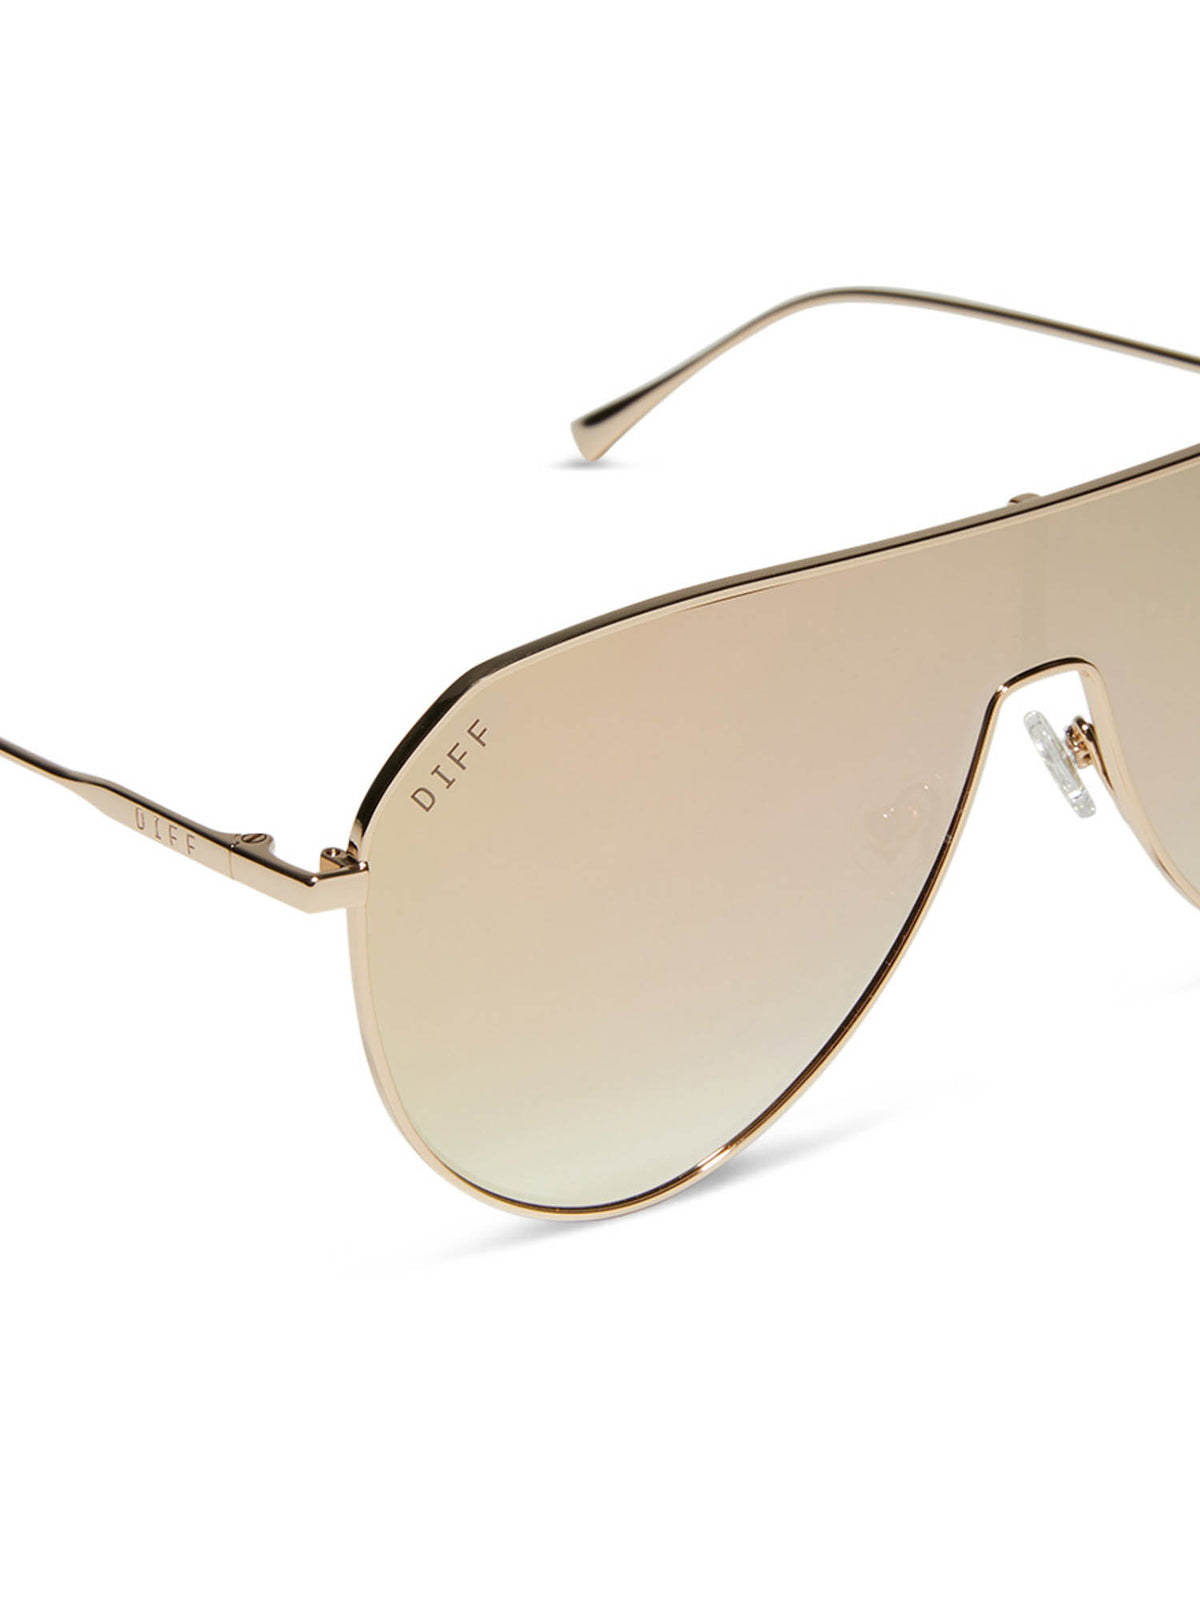 DIFF eyewear dash shield sunglasses in gold and taupe flash